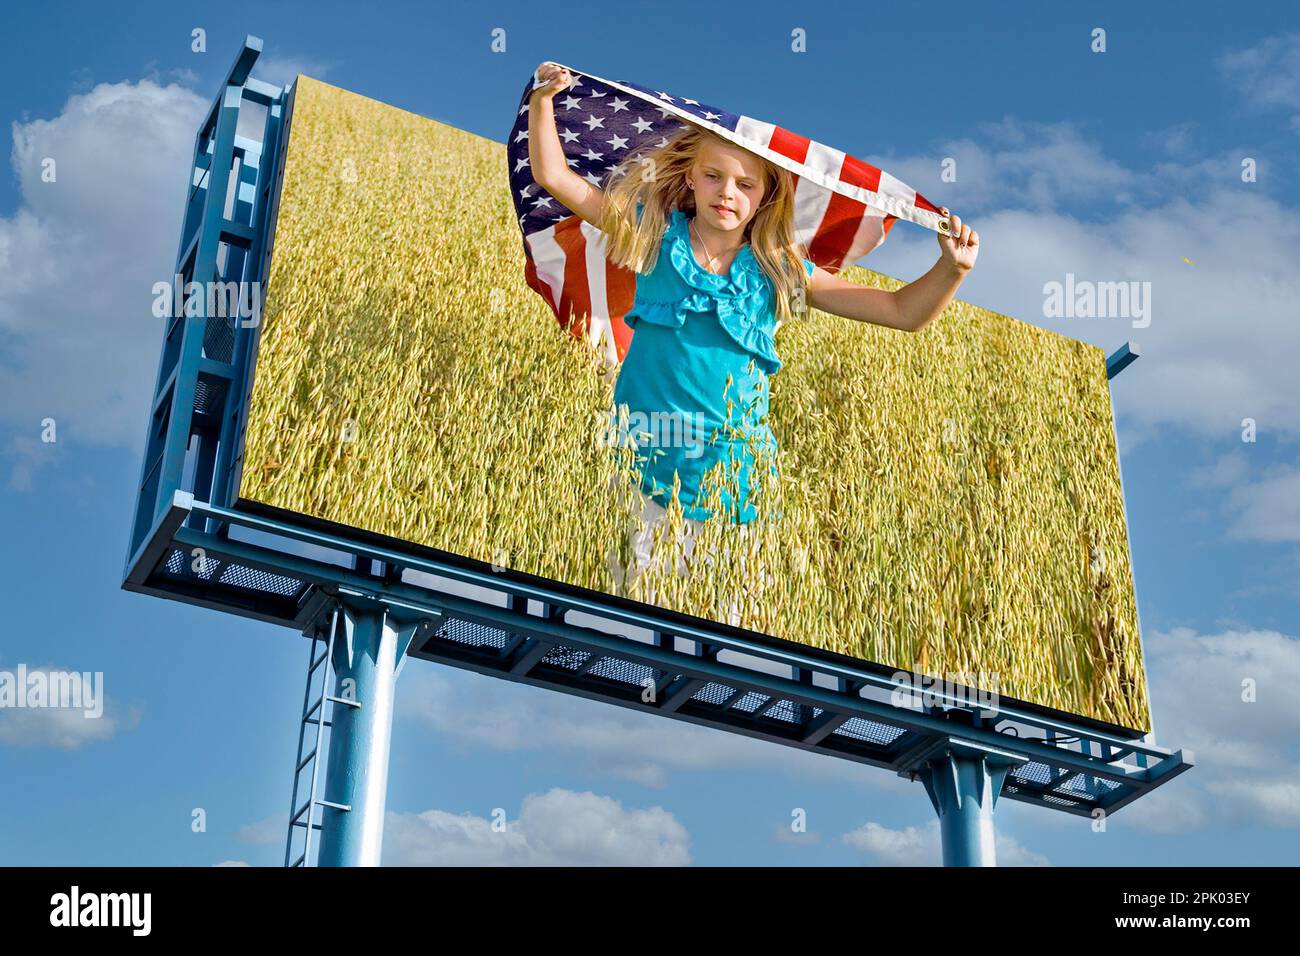 Billboard photo of  a young Caucasian girl running with an American flag in a wheat field with sky background Stock Photo